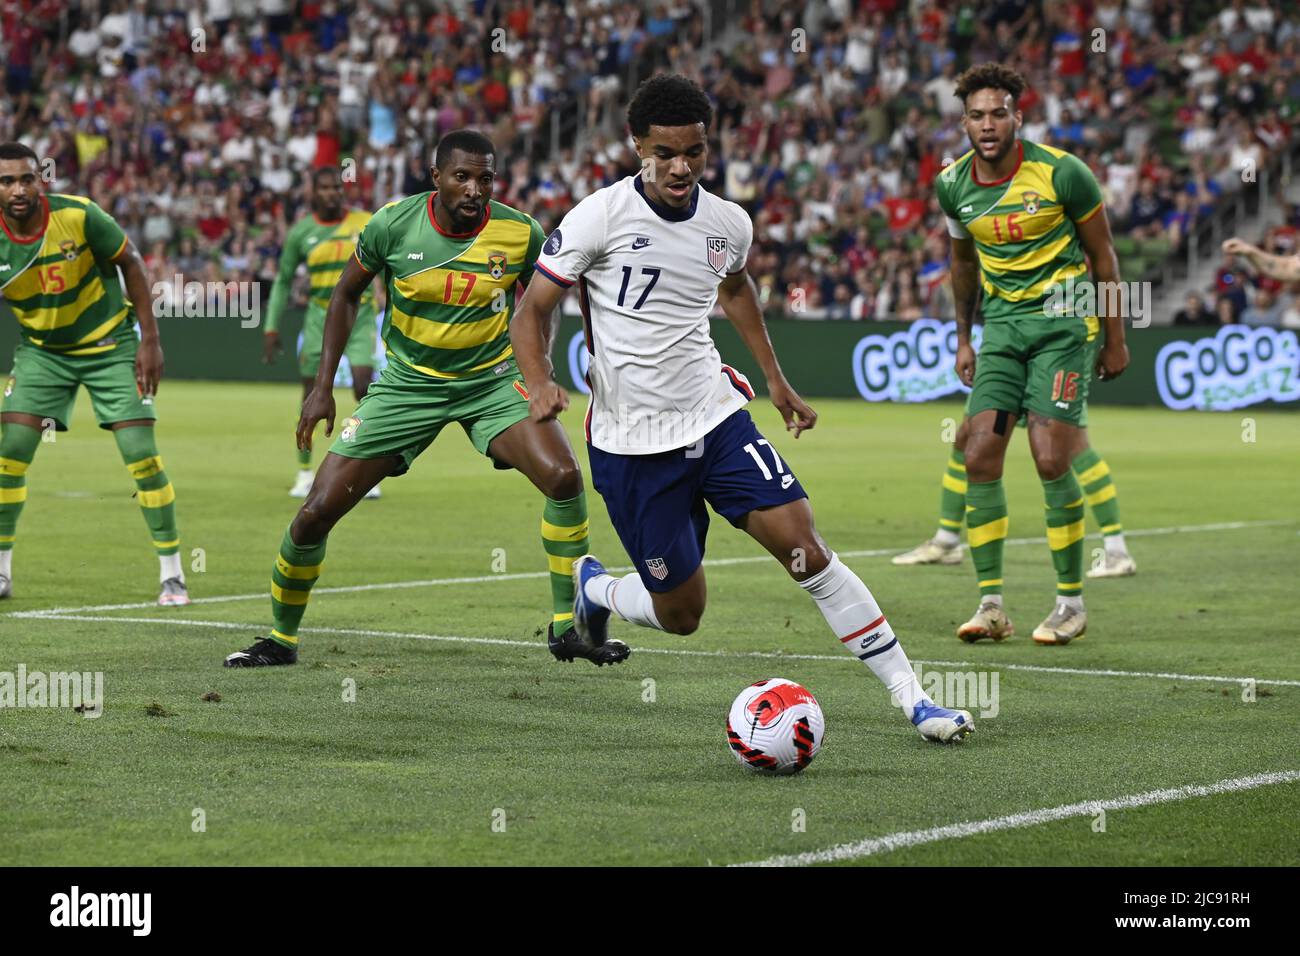 Austin, Texas USA, 10th June, 2022: USA's MALIK TILLMAN (17) heads to the goal defended by TYRONE STERLING of Grenada (17 in green) during second half action of a CONCACAF Nation's League match at Austin's Q2 Stadium. This is the U.S. Men's National Team's (USMNT) final match in the U.S. before the 2022 FIFA World Cup. Credit: Bob Daemmrich/Alamy Live News Stock Photo